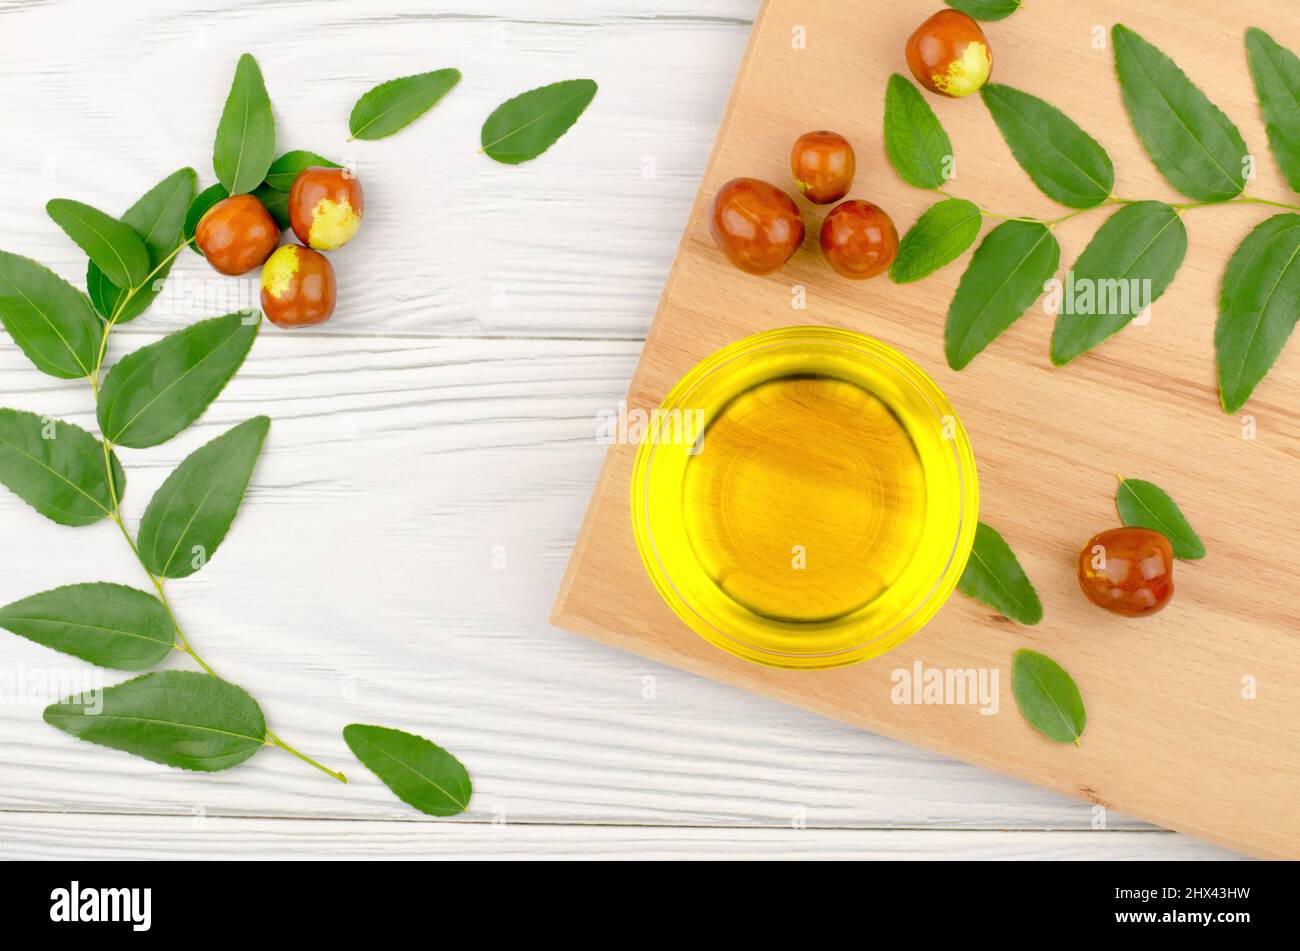 Jojoba oil in a bowl, a sprig of jojoba and fruits on a wooden table, top view Stock Photo